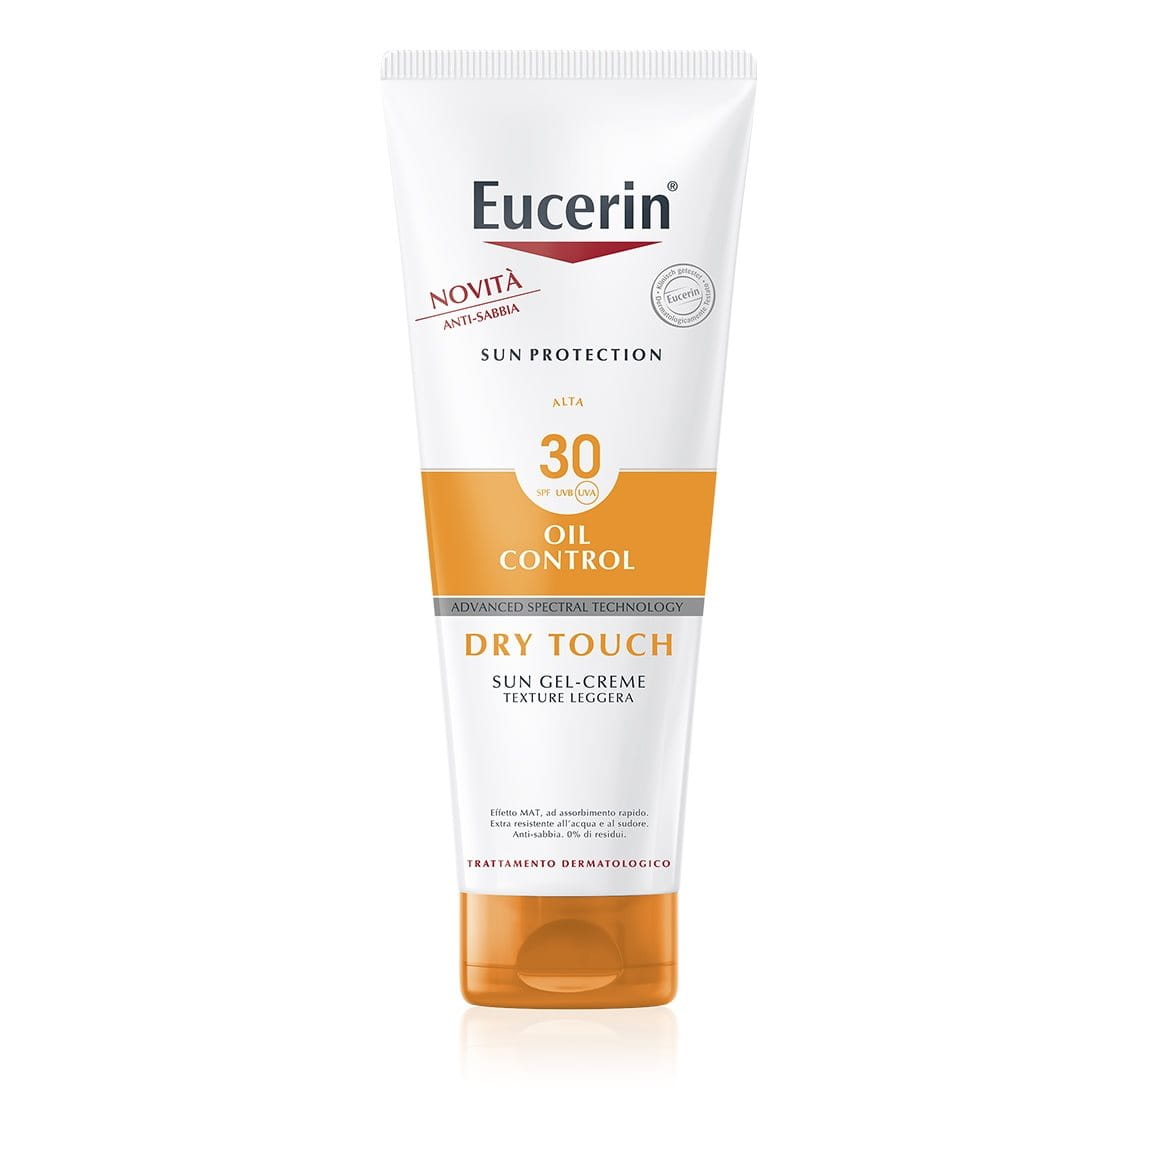 Oil Control
Dry Touch Sun Gel Creme 
SPF 30